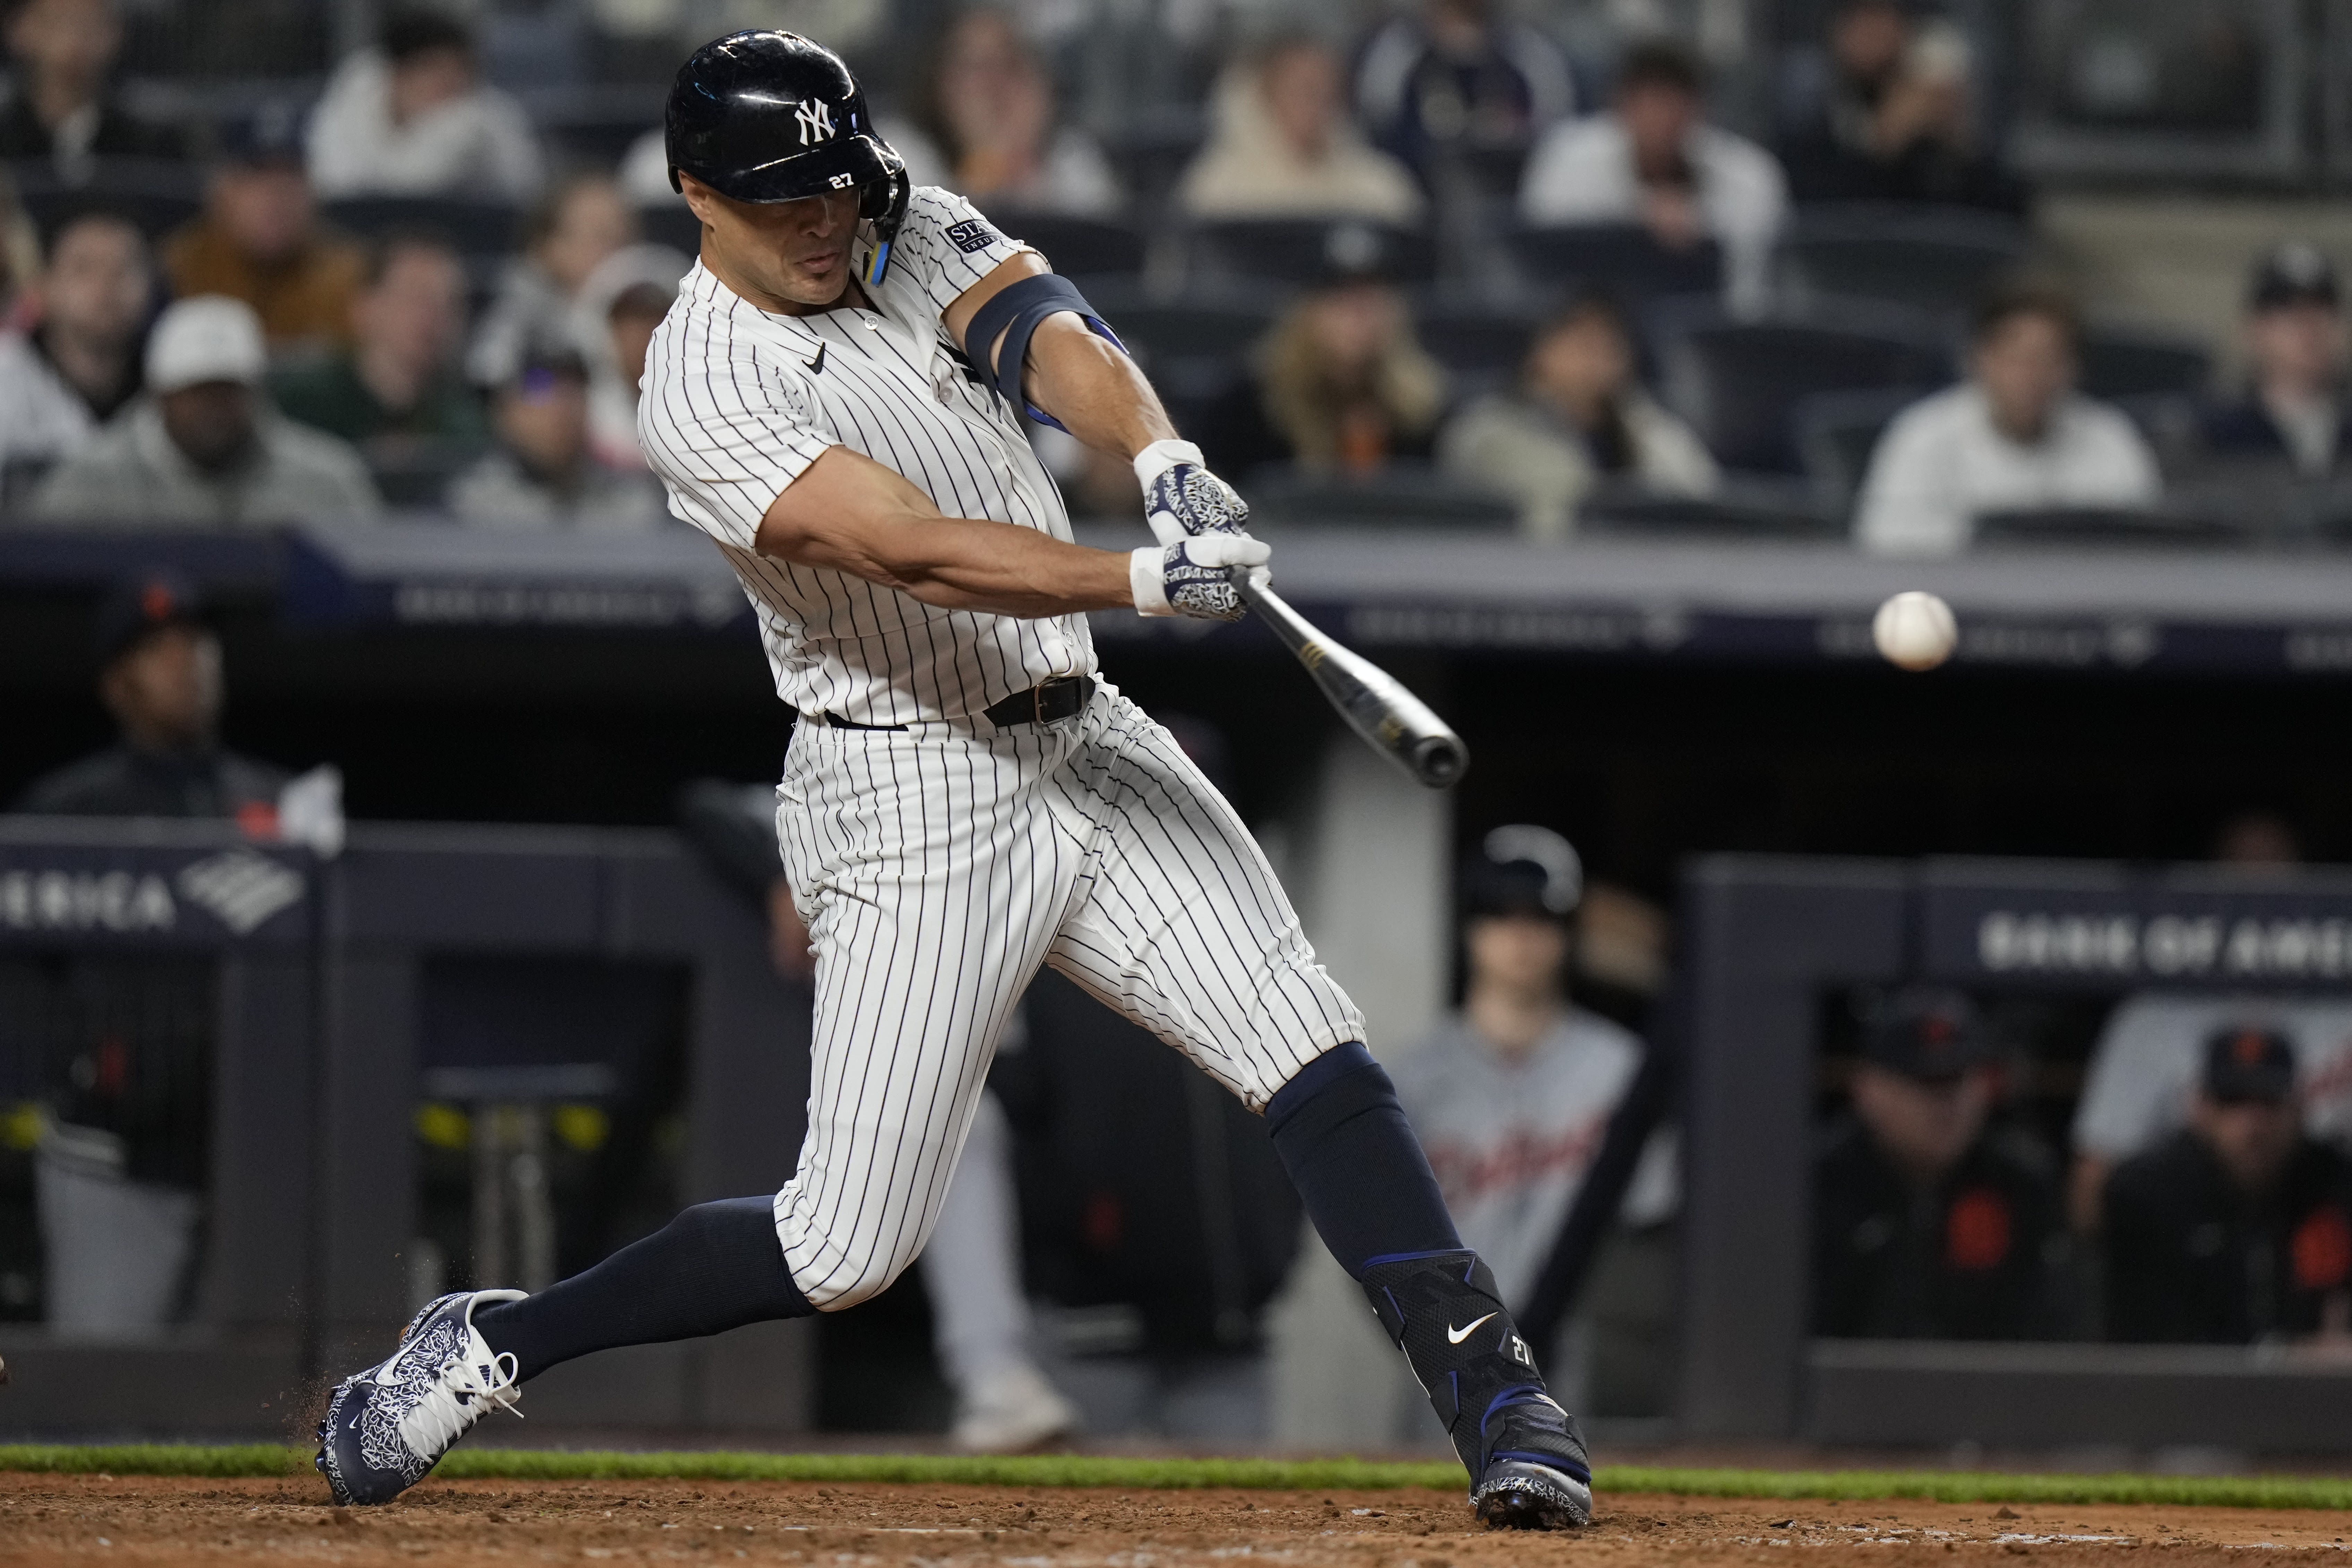 Giancarlo Stanton proves he's King of Swing in MLB's latest metric advancements